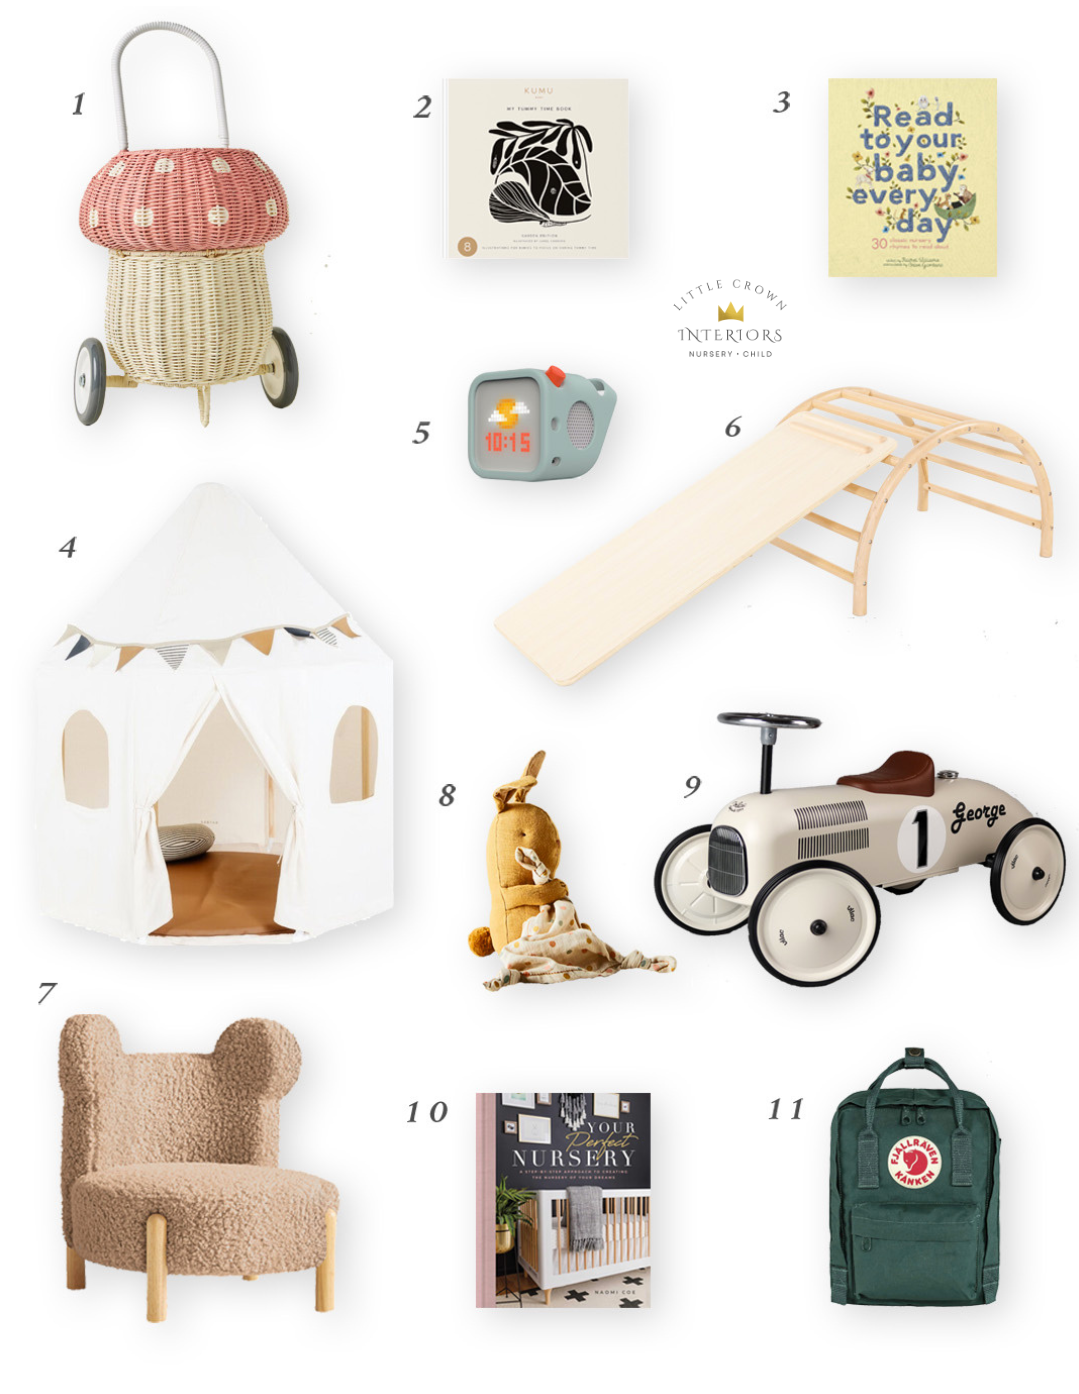 Pin on Gift Guides and Ideas for adults and kids